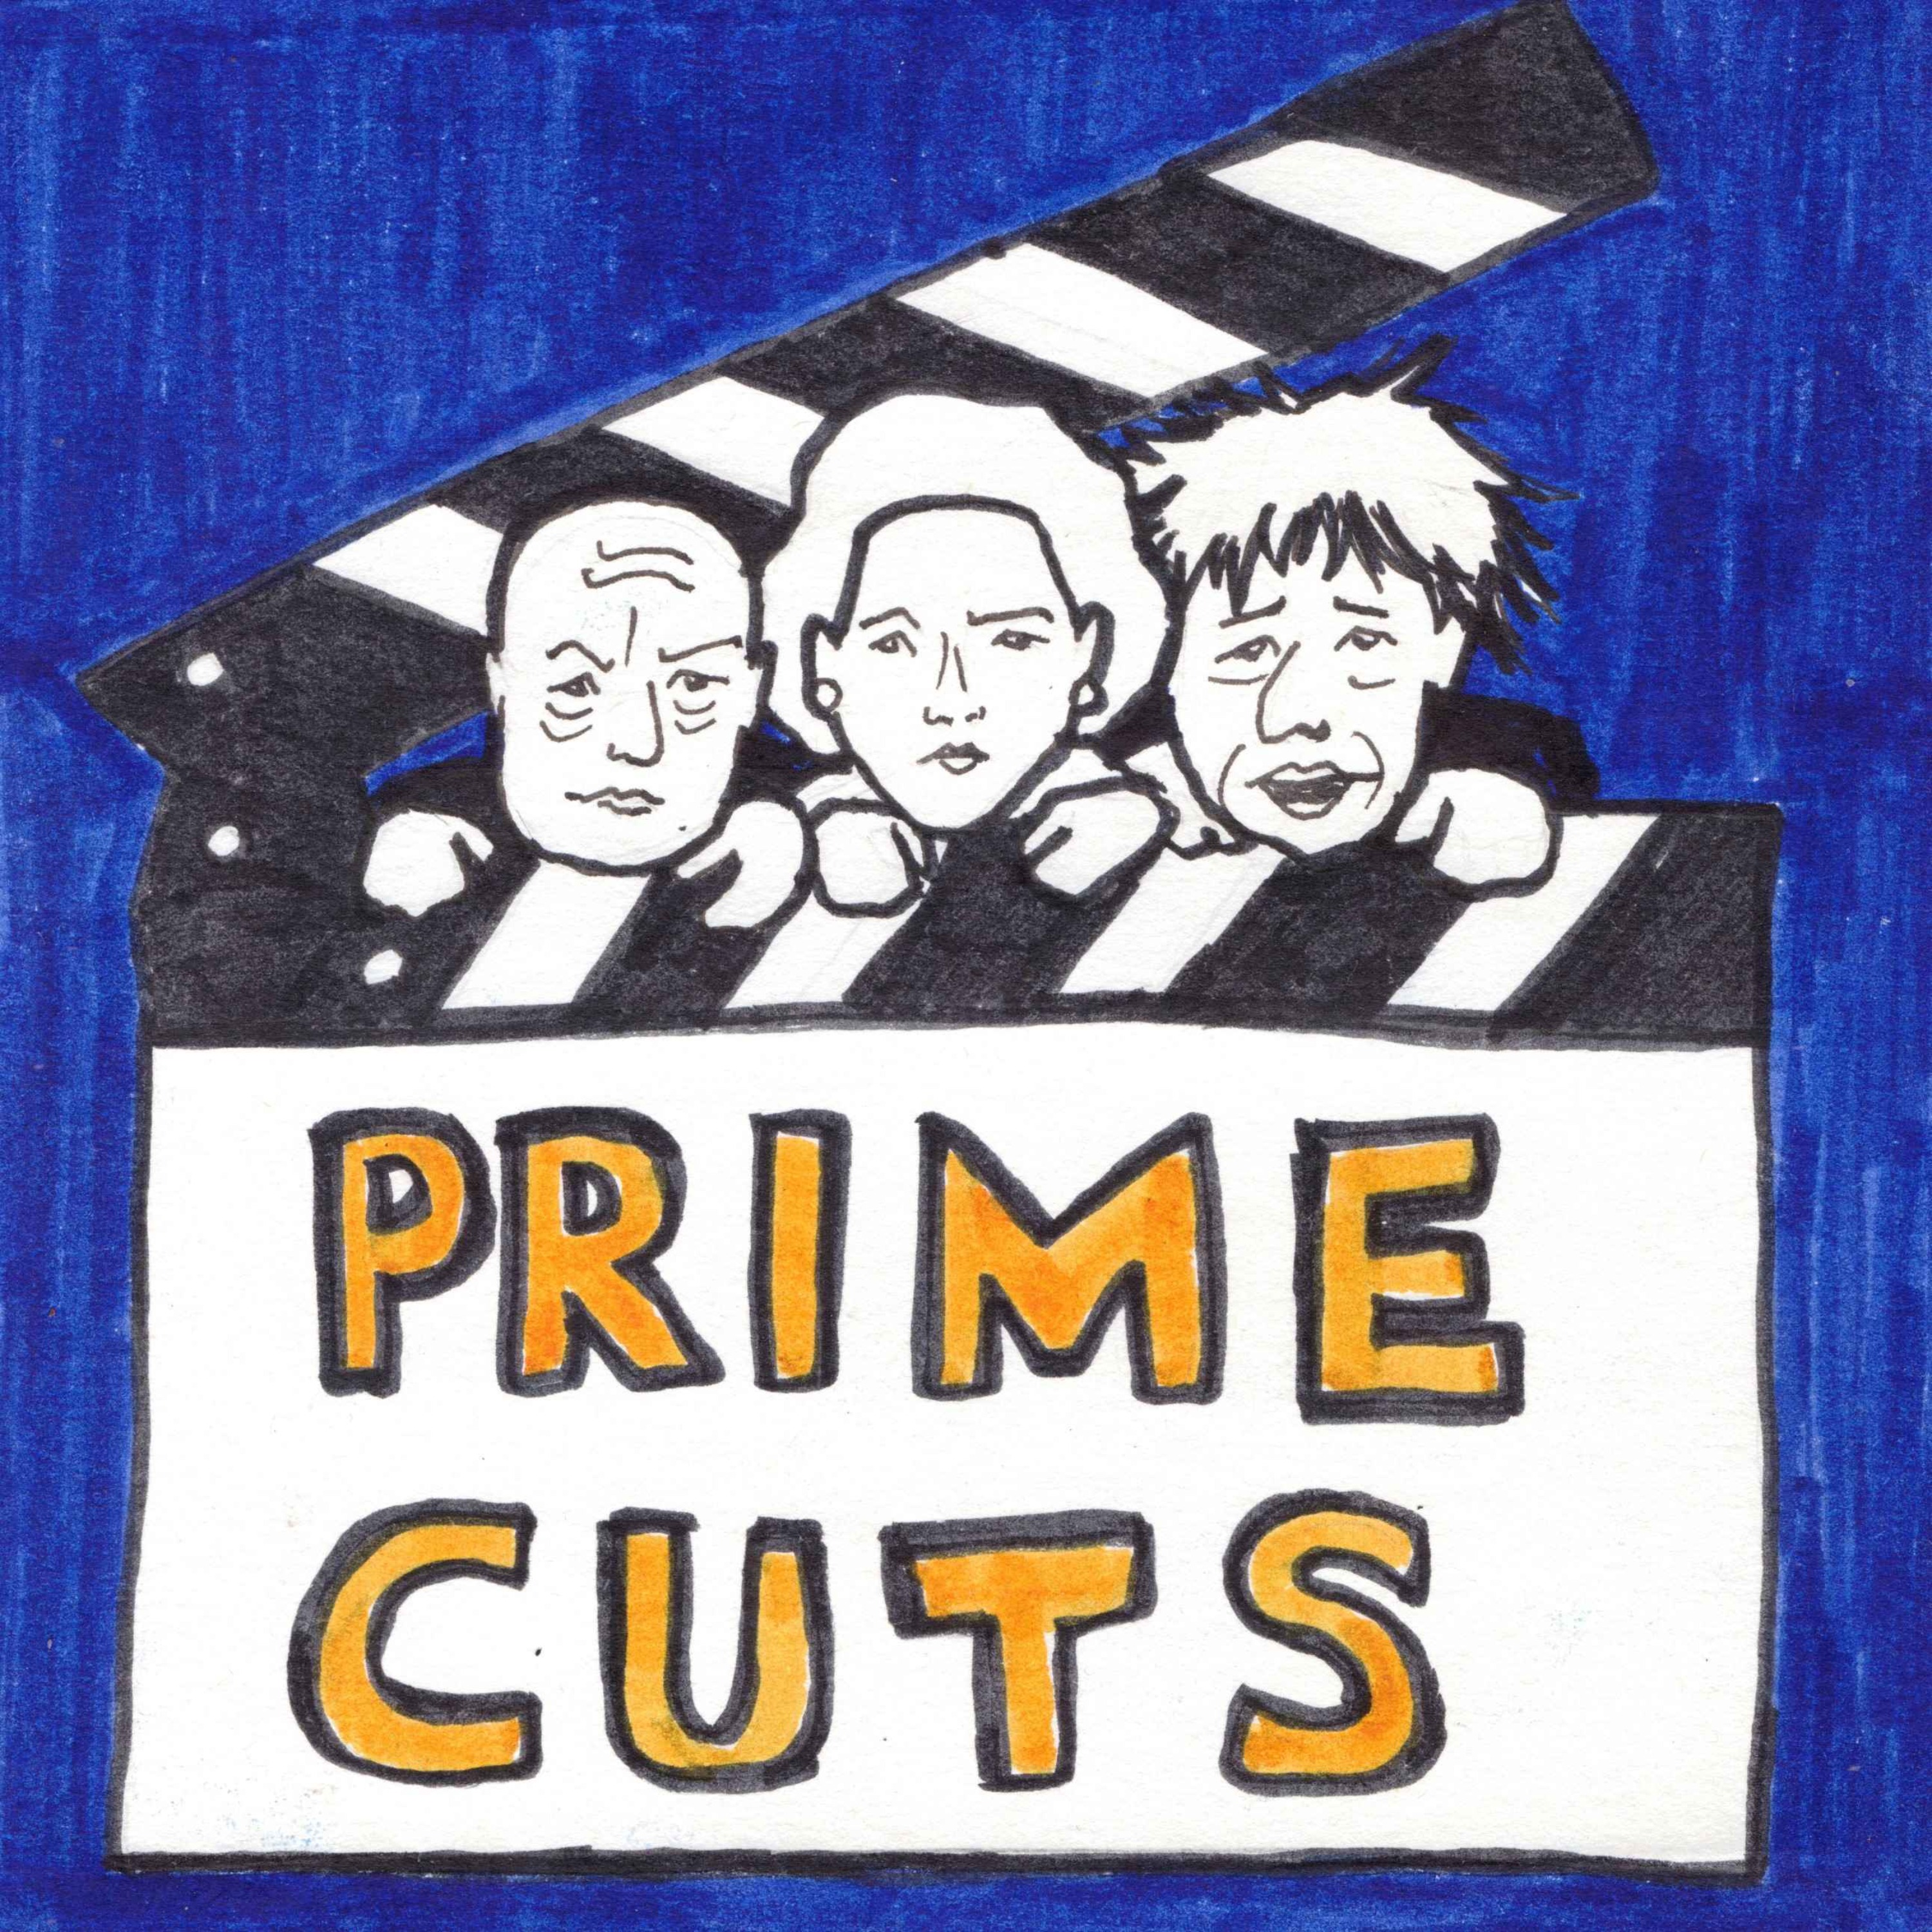 Prime Cuts: What’s happening with Mr Speaker?